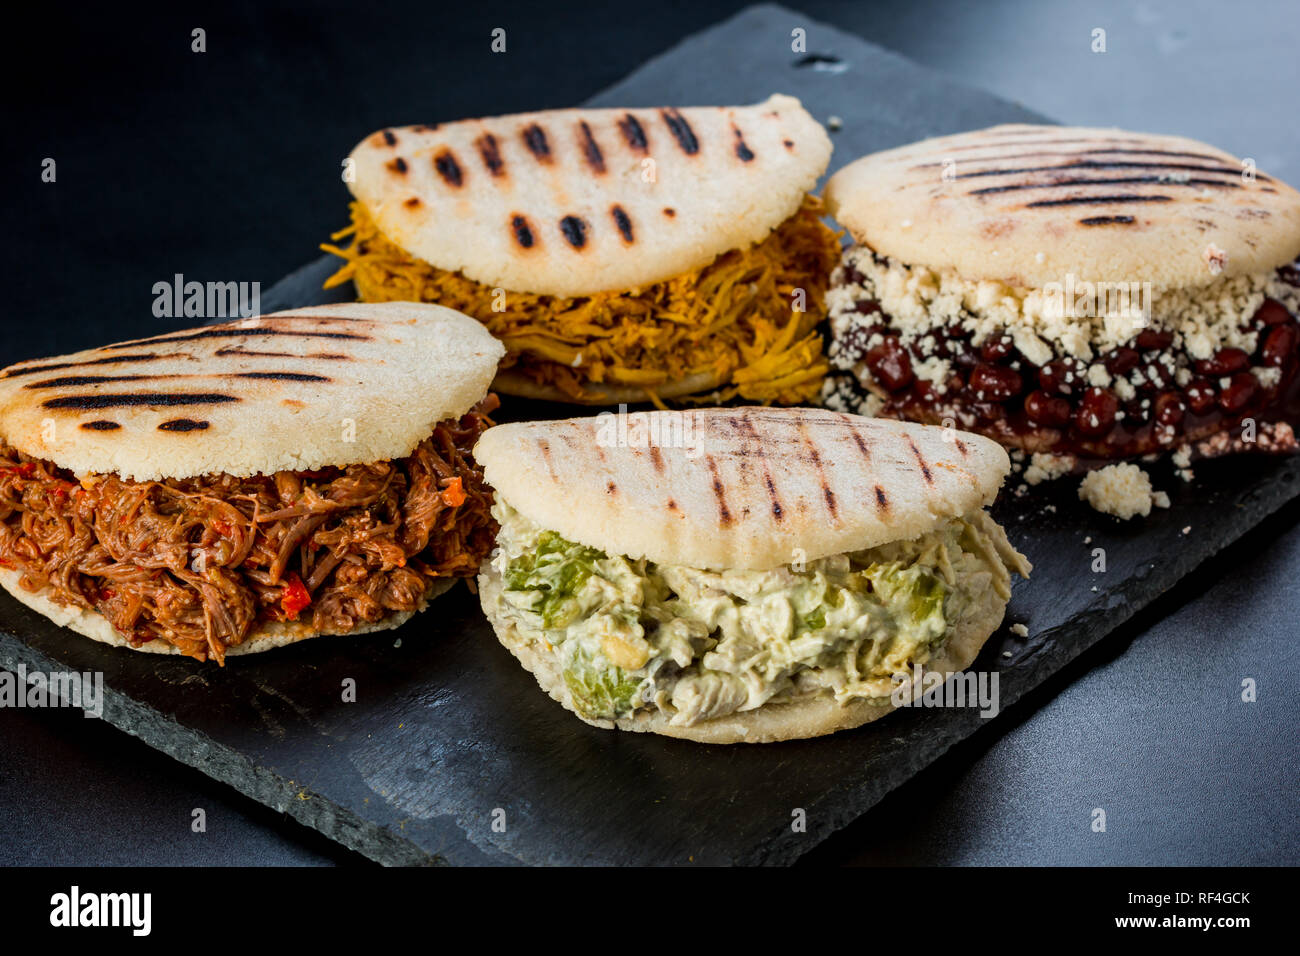 https://c8.alamy.com/comp/RF4GCK/venezuelan-latin-american-food-4-arepas-of-different-stuffing-on-a-black-table-arepa-with-mechada-meat-queen-pepeada-black-beans-with-white-cheese-RF4GCK.jpg